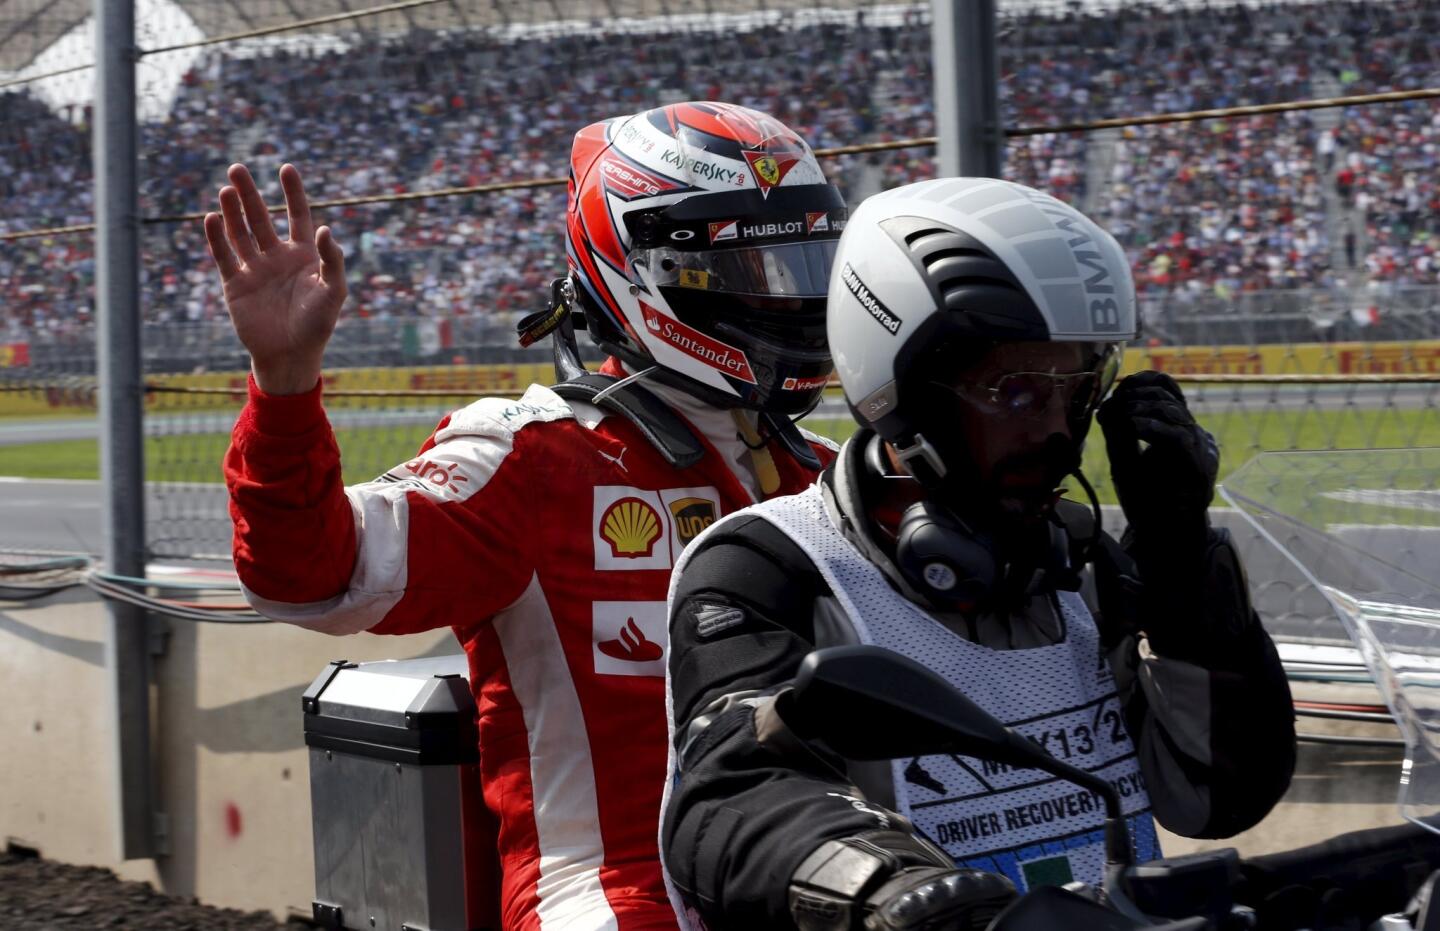 Ferrari Formula One driver Kimi Raikkonen of Finland waves after retiring from the race at the Mexican F1 Grand Prix at Autodromo Hermanos Rodriguez in Mexico City